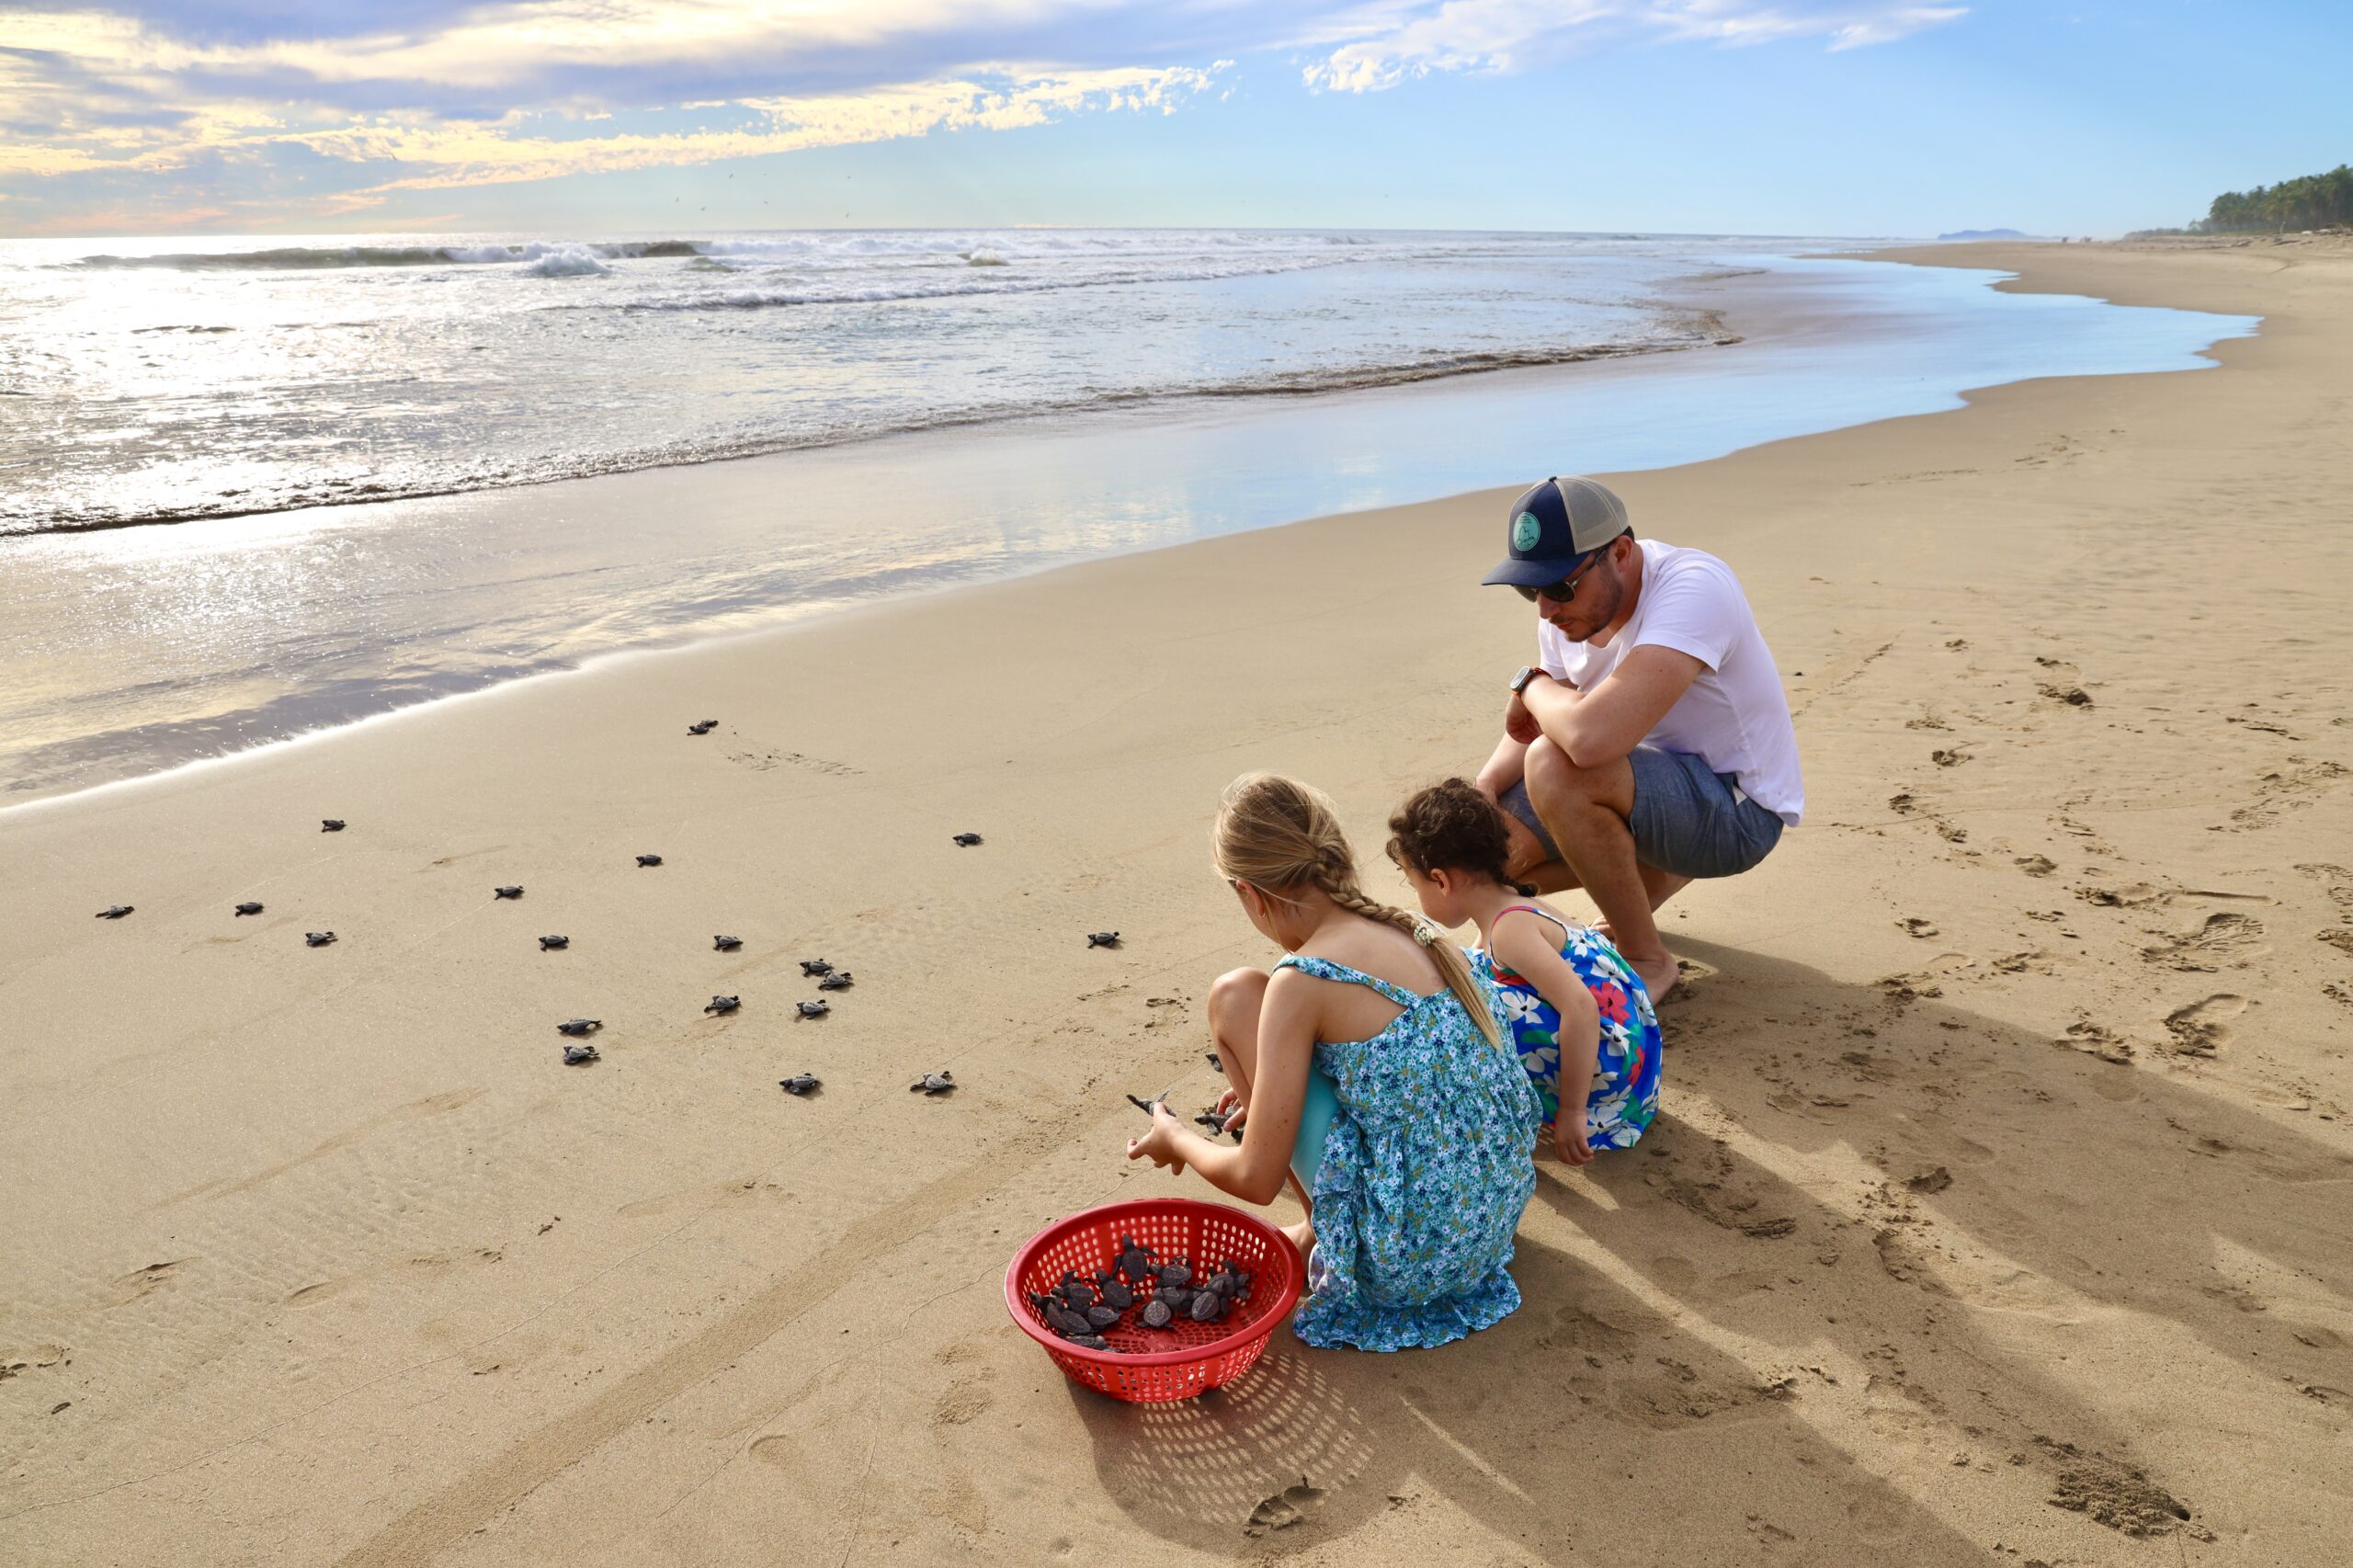 Baby turtle release at Juluchuca Beach, Mexico